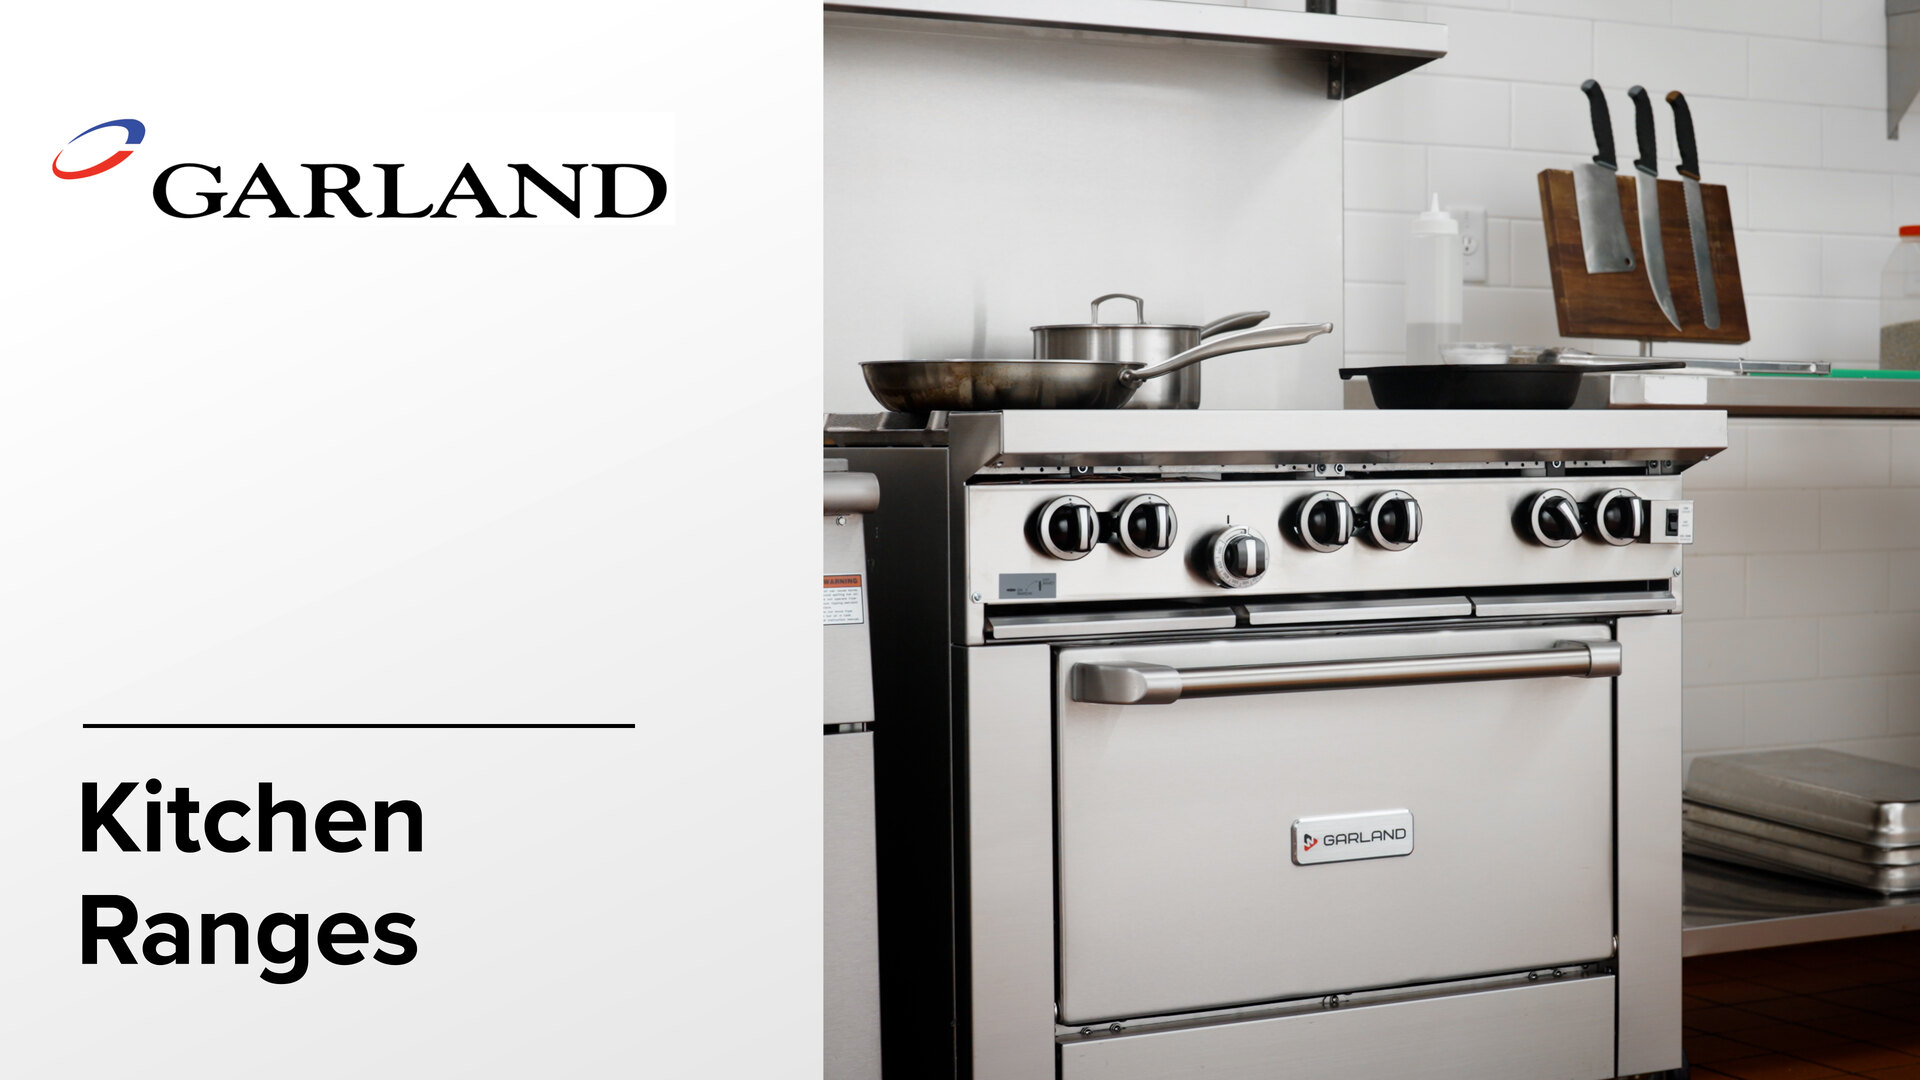 Garland 36ER32-3 Heavy-Duty Electric Range with 2 All-Purpose Top Sections,  2 Open Burners, and Standard Oven - 208V, 3 Phase, 20.7 kW